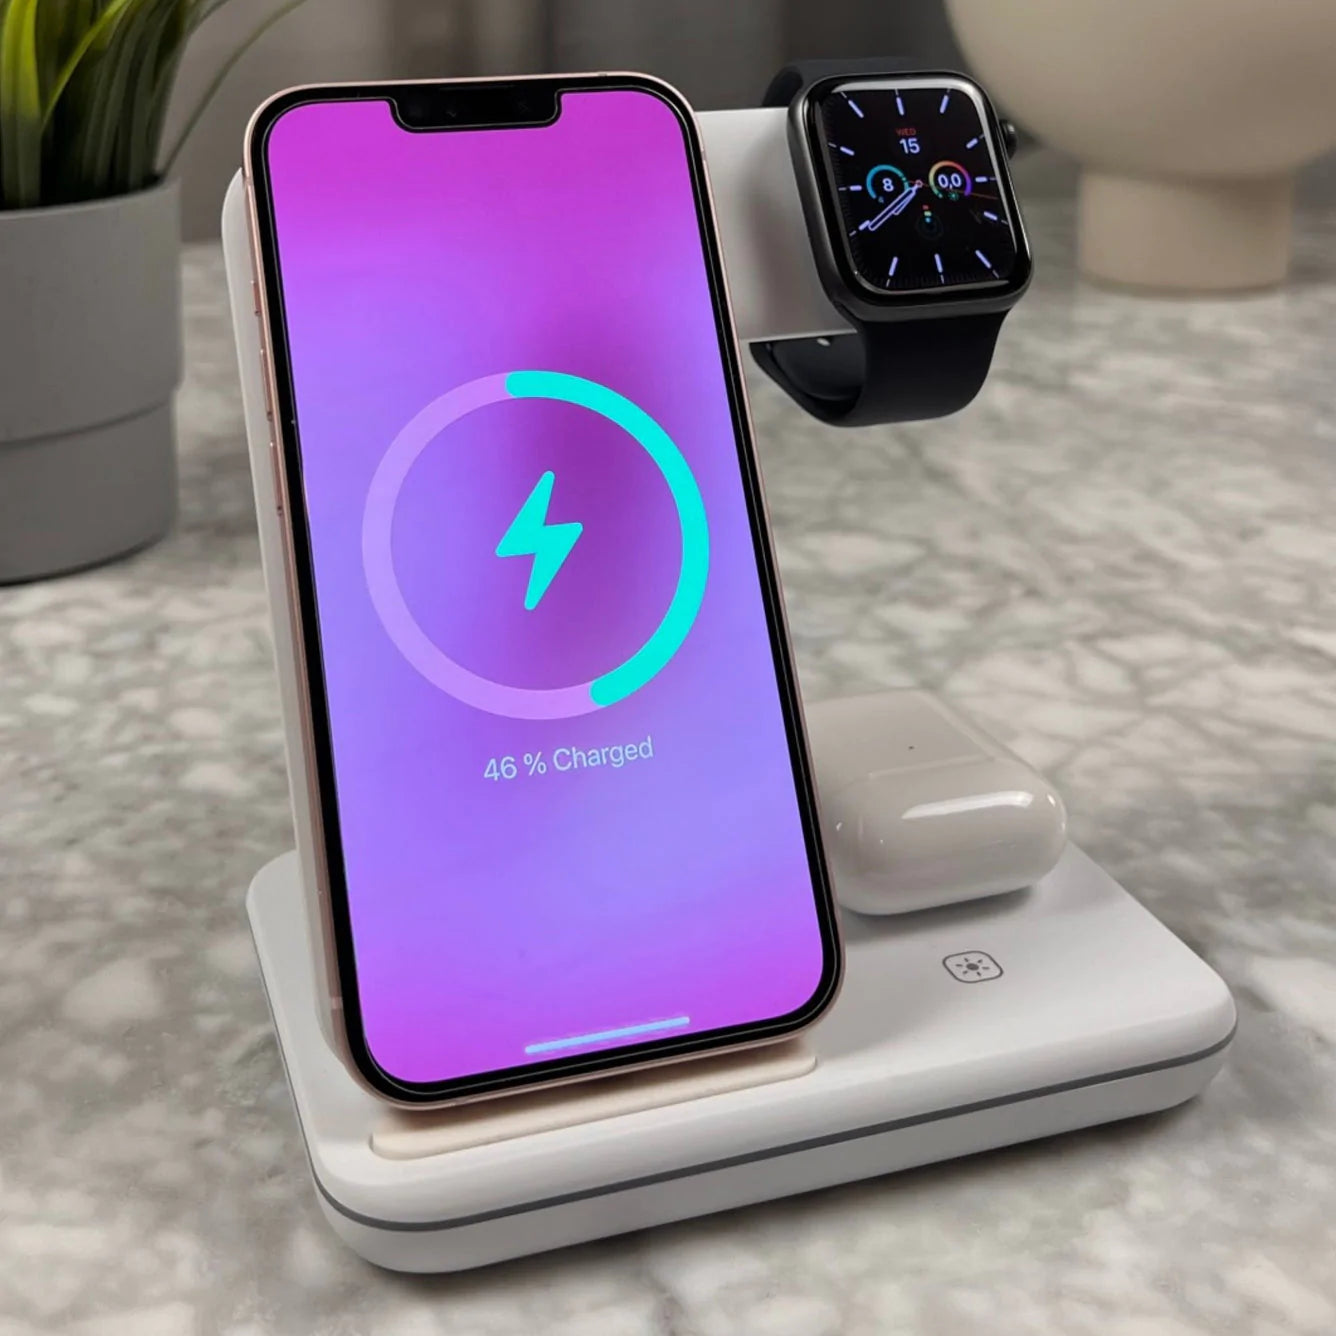 3 in 1 Fast Charging Station